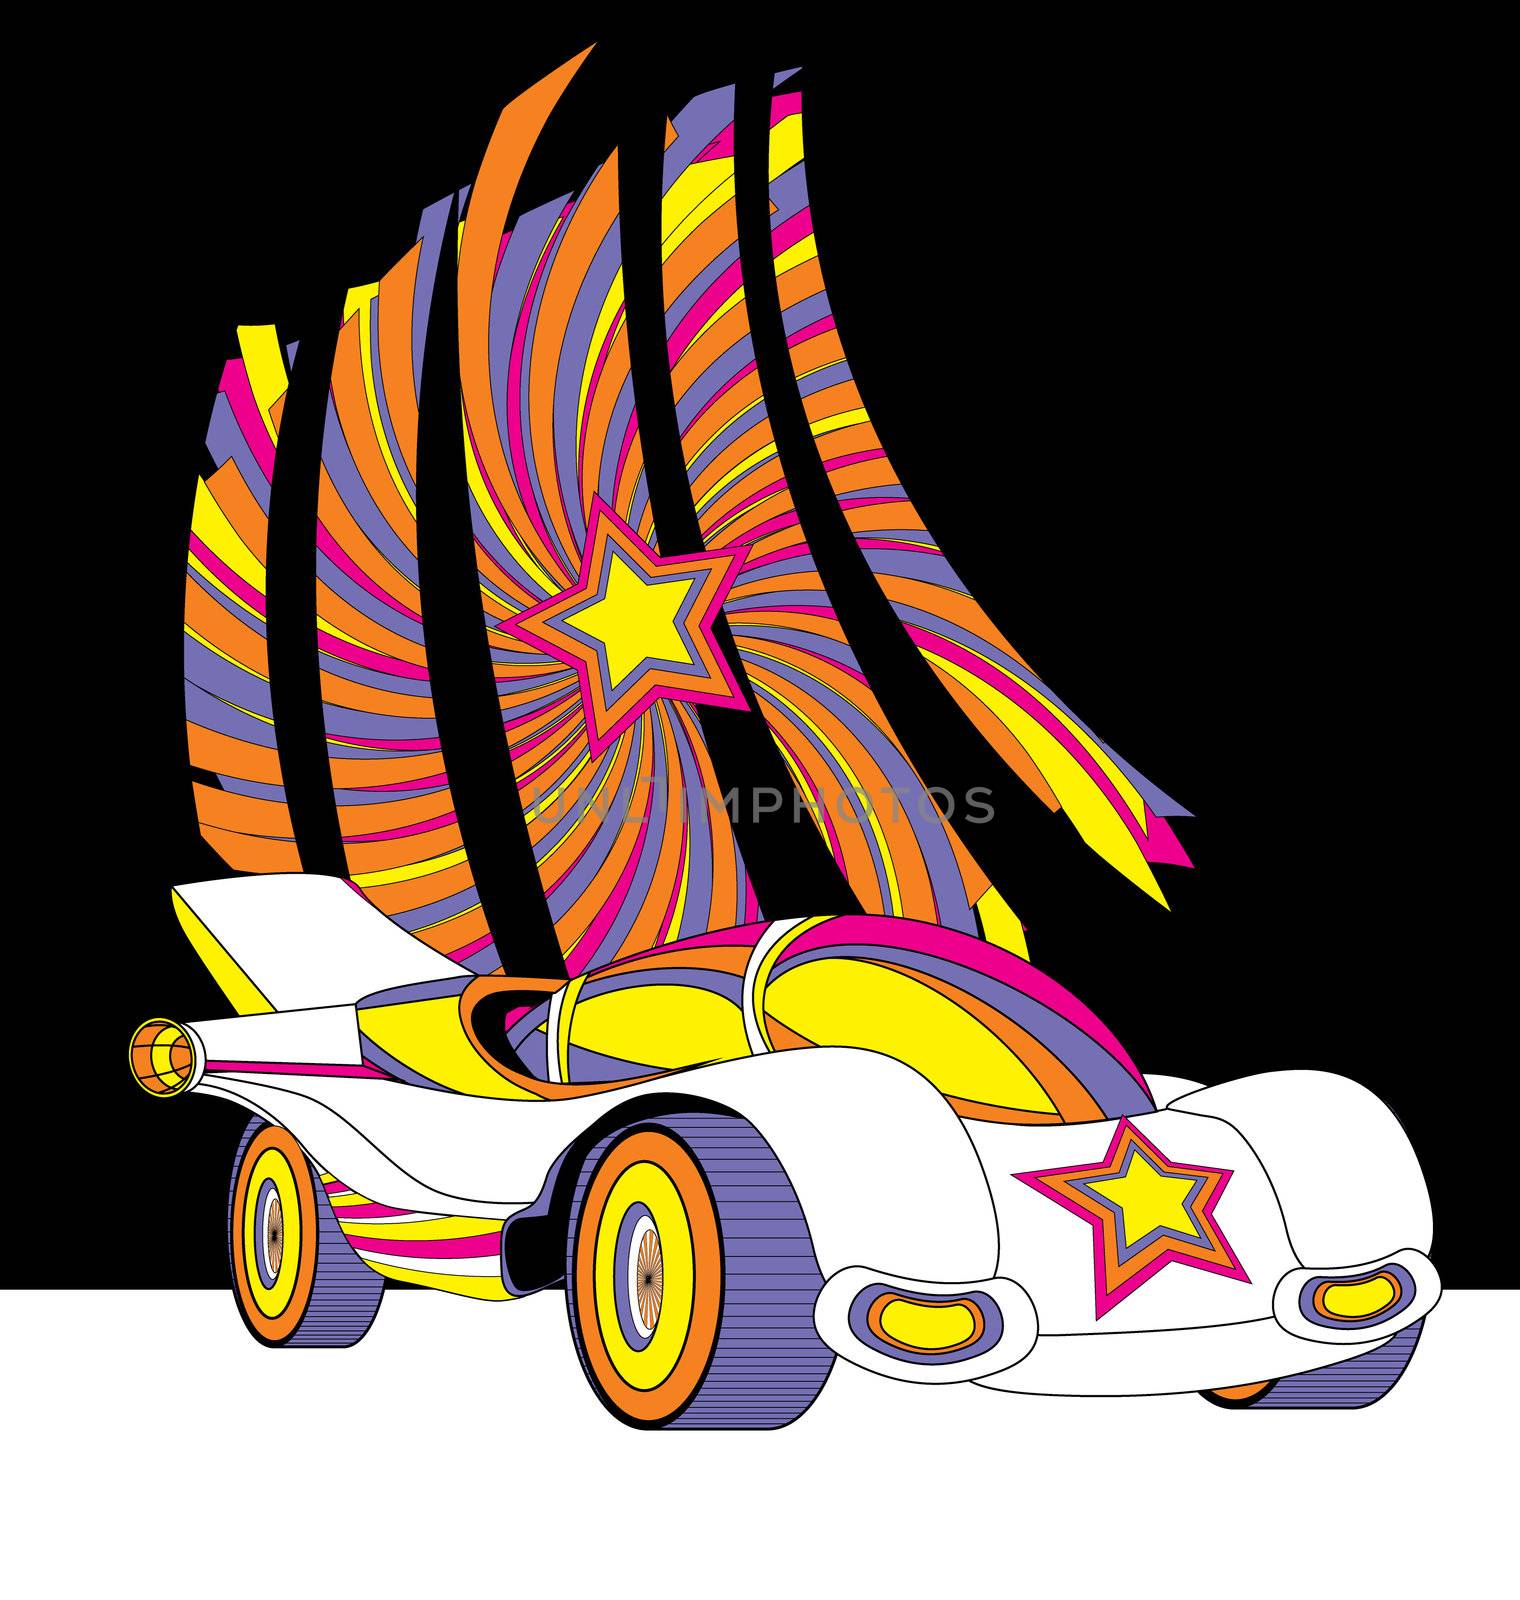 vector style race car with star decor colorful futuristic illustration